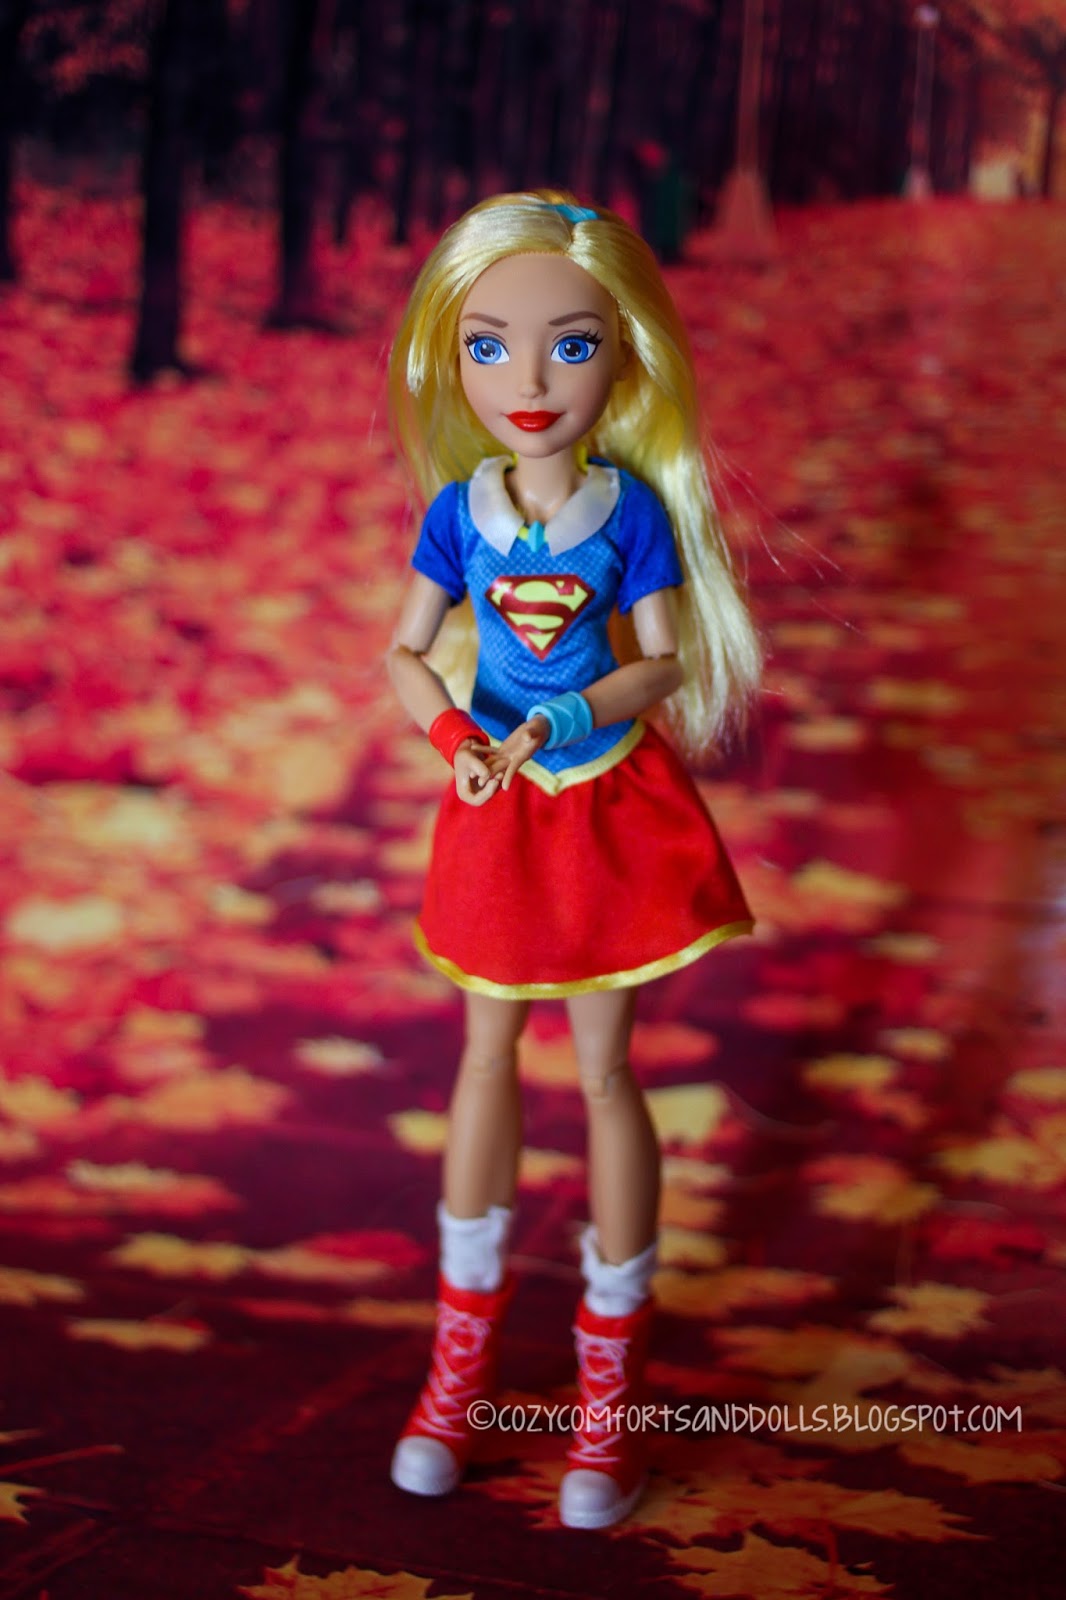 DC Comics Super Hero Girls 12" Wonder Woman Figure Doll Outfit Clothes Shoes NEW 